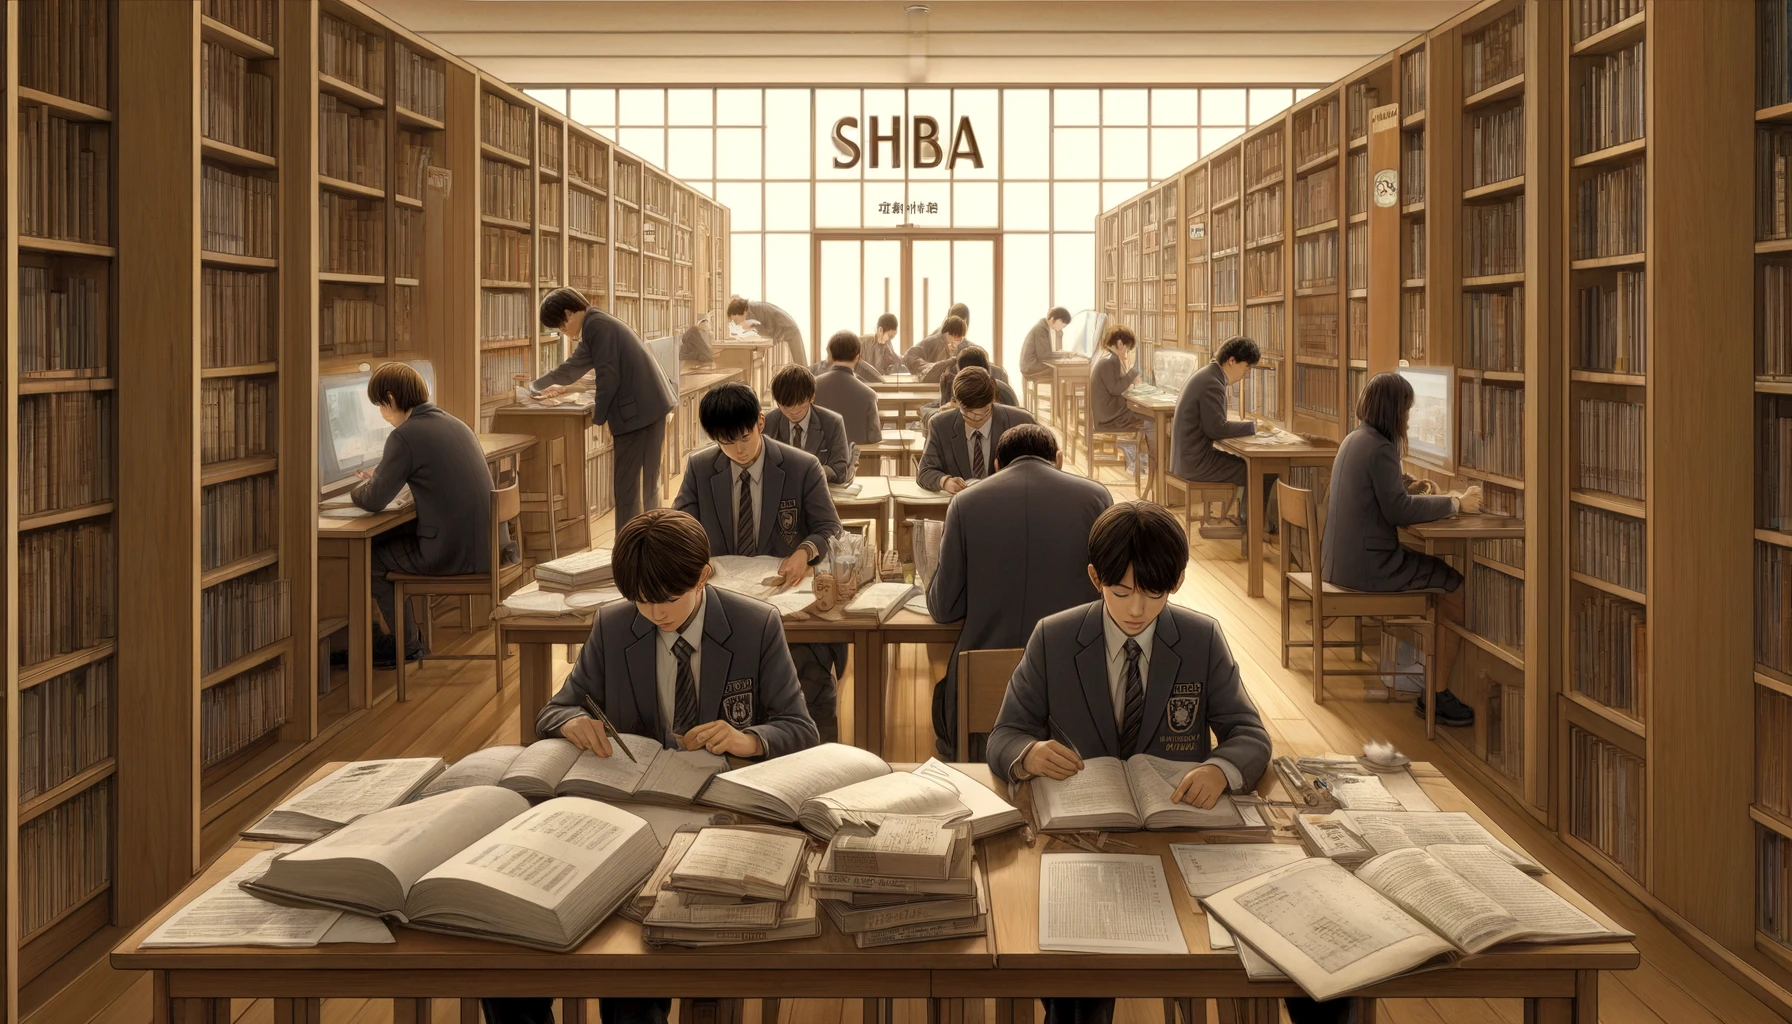 An intense study scene at SHIBA middle school, showcasing students preparing for exams. The library setting includes students of different backgrounds deeply focused, with books open and notes scattered around. Some are in group discussions while others work individually, immersed in their studies. The atmosphere is calm yet studious, with the name 'SHIBA' subtly included on book covers and study materials, reflecting the school's academic environment.